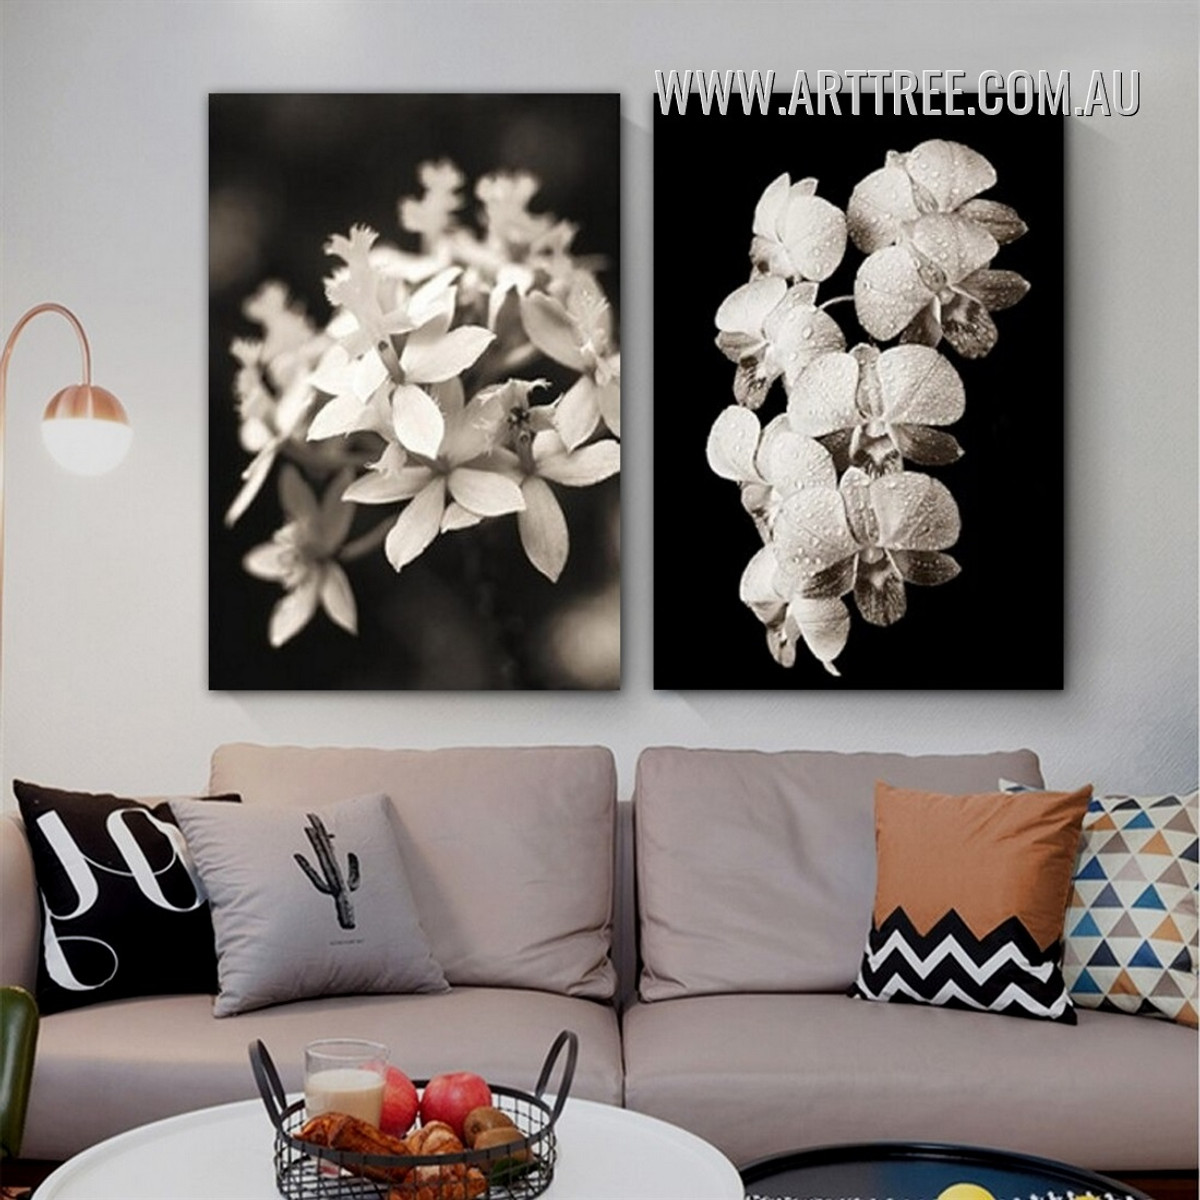 Moth Orchid Blossoms Modern 2 Piece Framed Wall Art Photograph Floral Canvas Print for Room Trimming